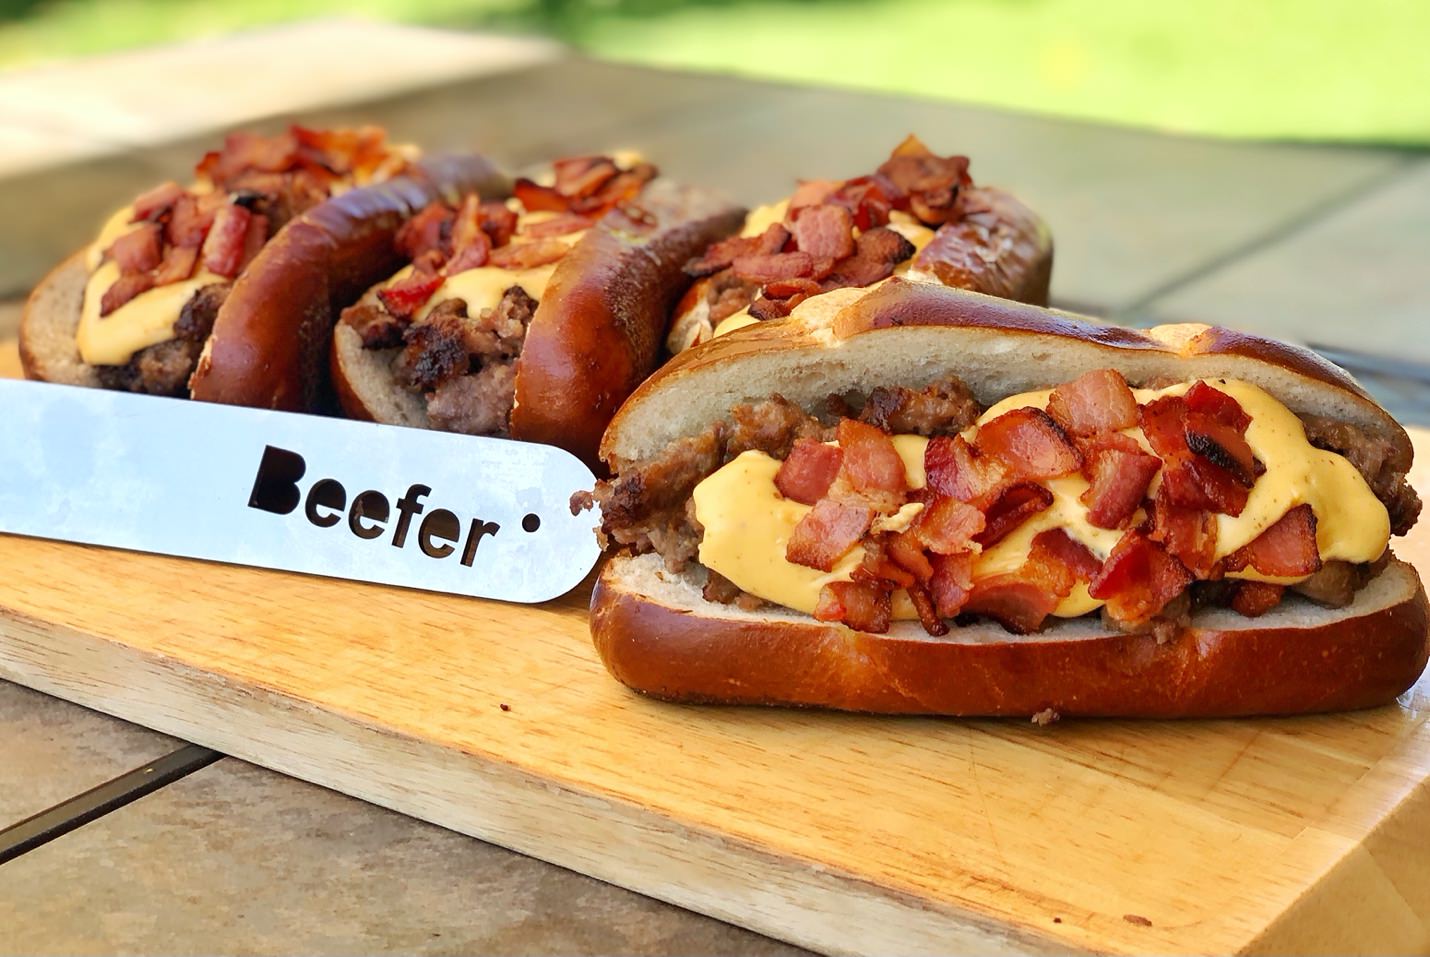 Triple B Pretzel Subs (Bratwurst, Beer Cheese and Bacon) from the Beefer